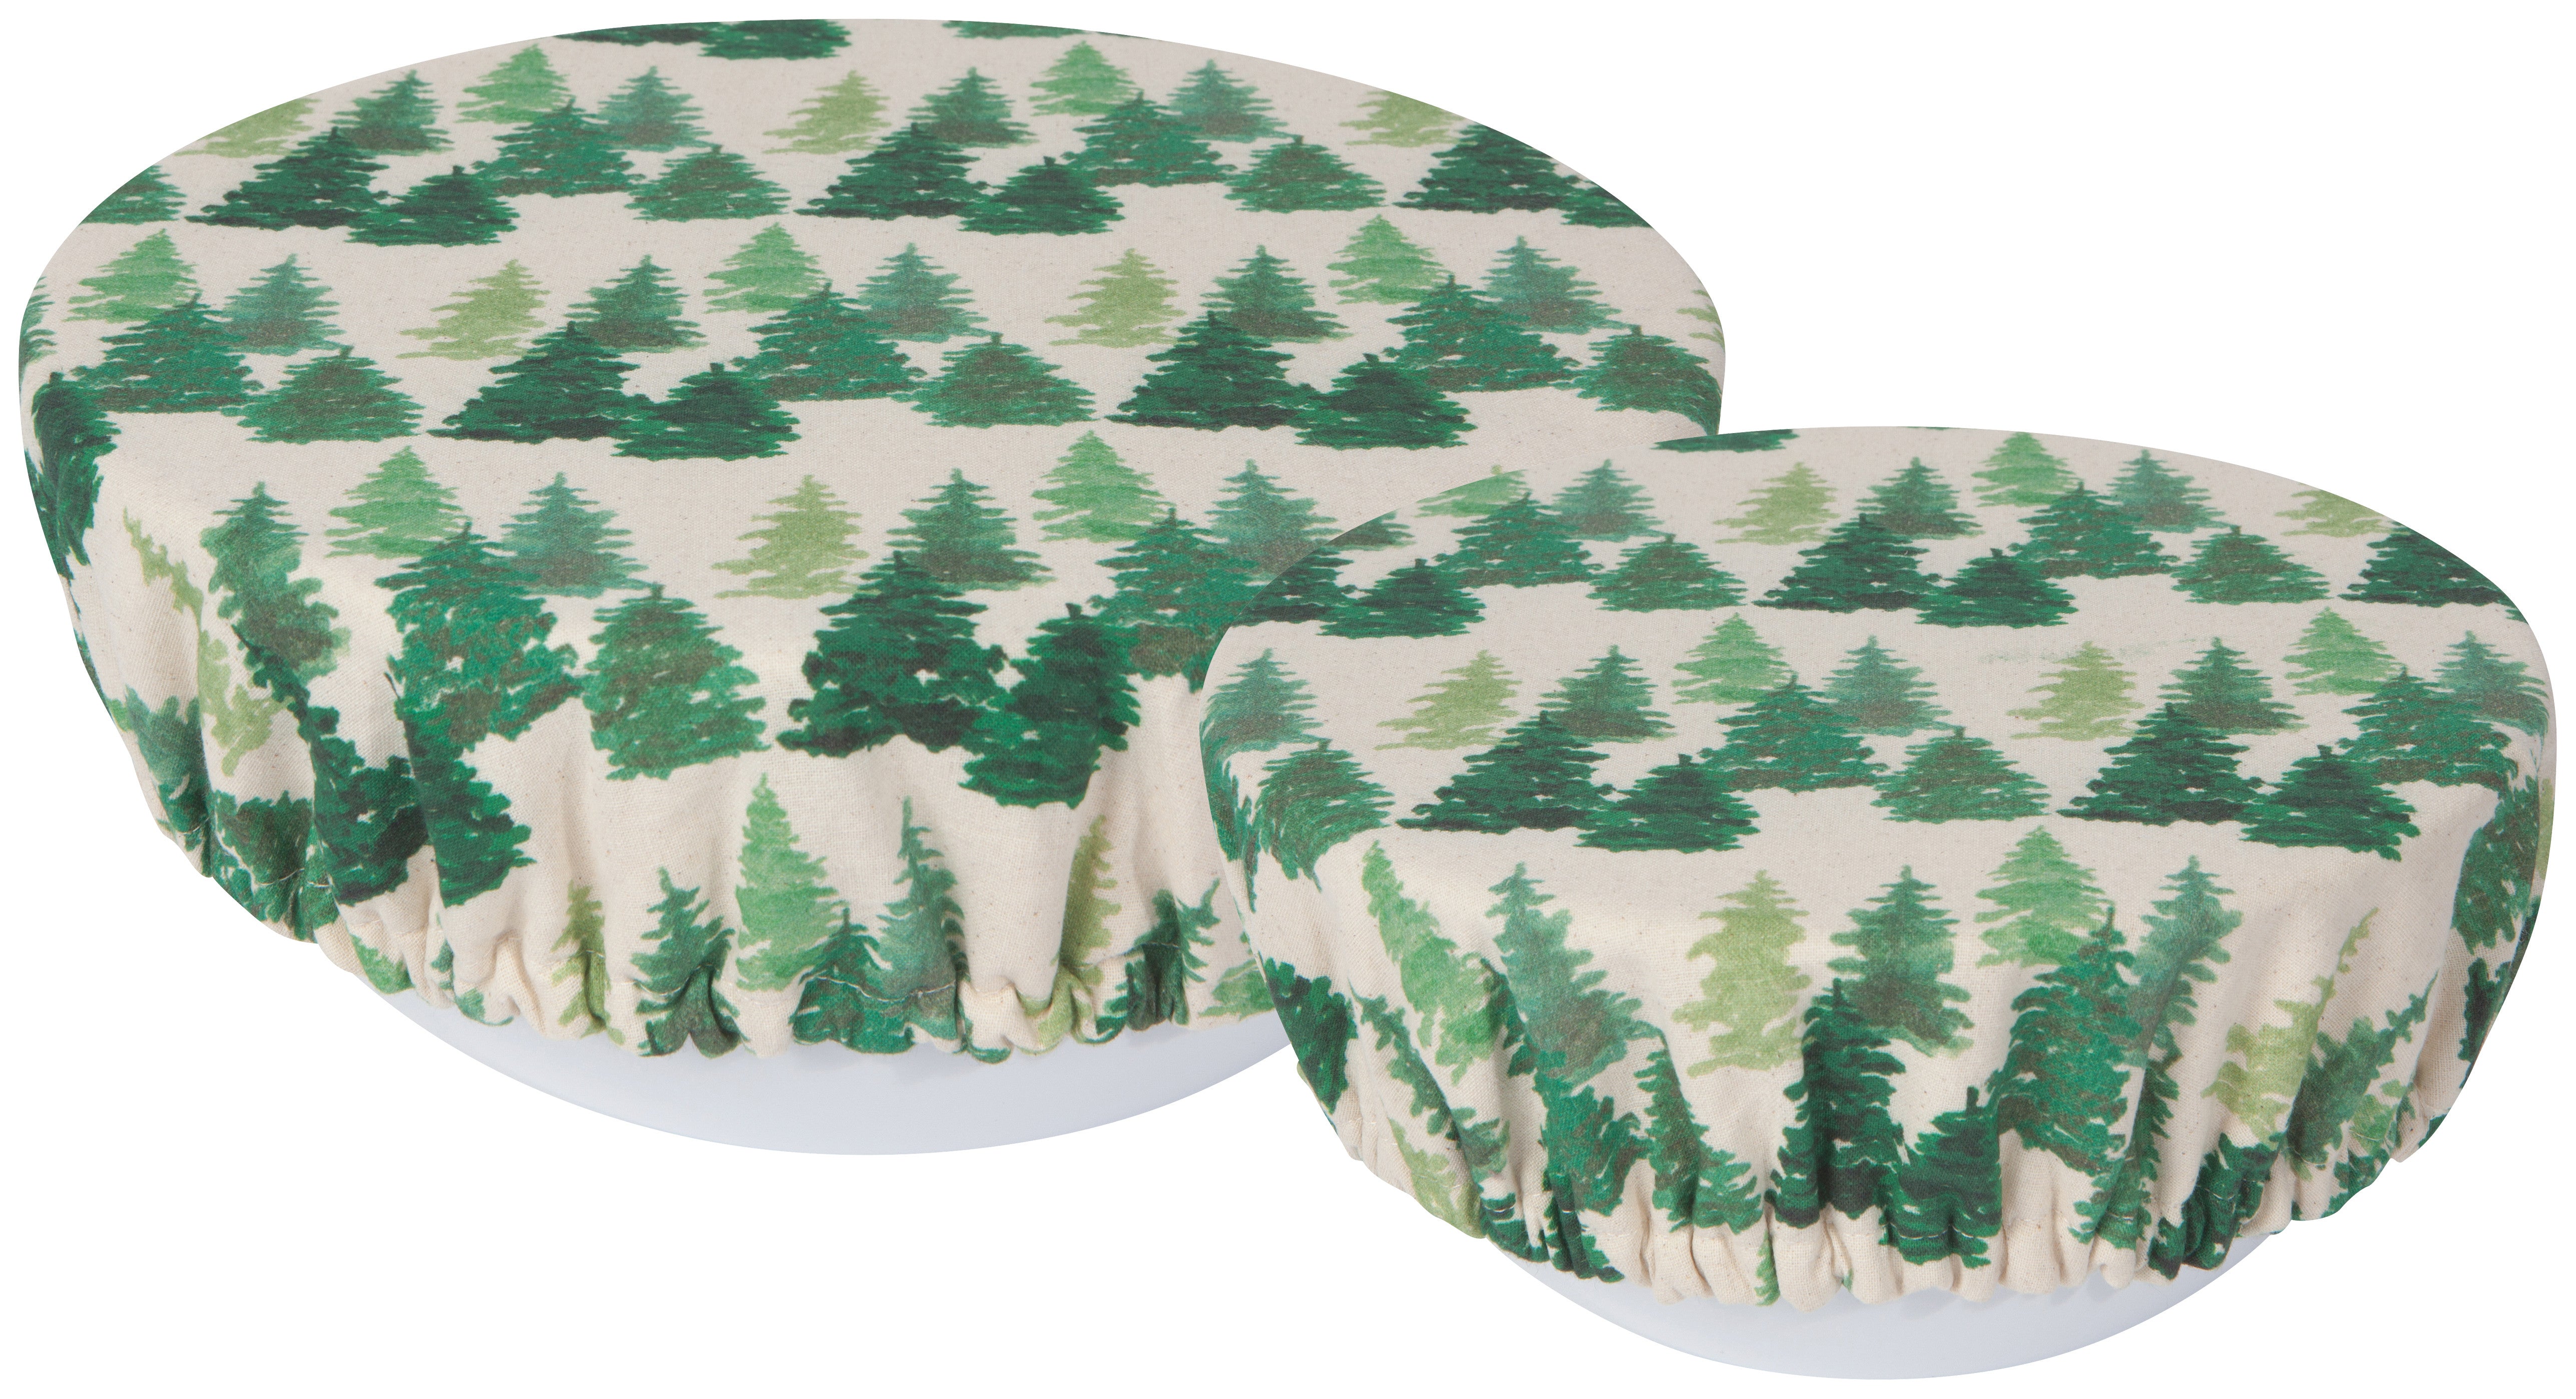 Bowl Covers: Set of Two - Woods Danica - Oscar & Libby's